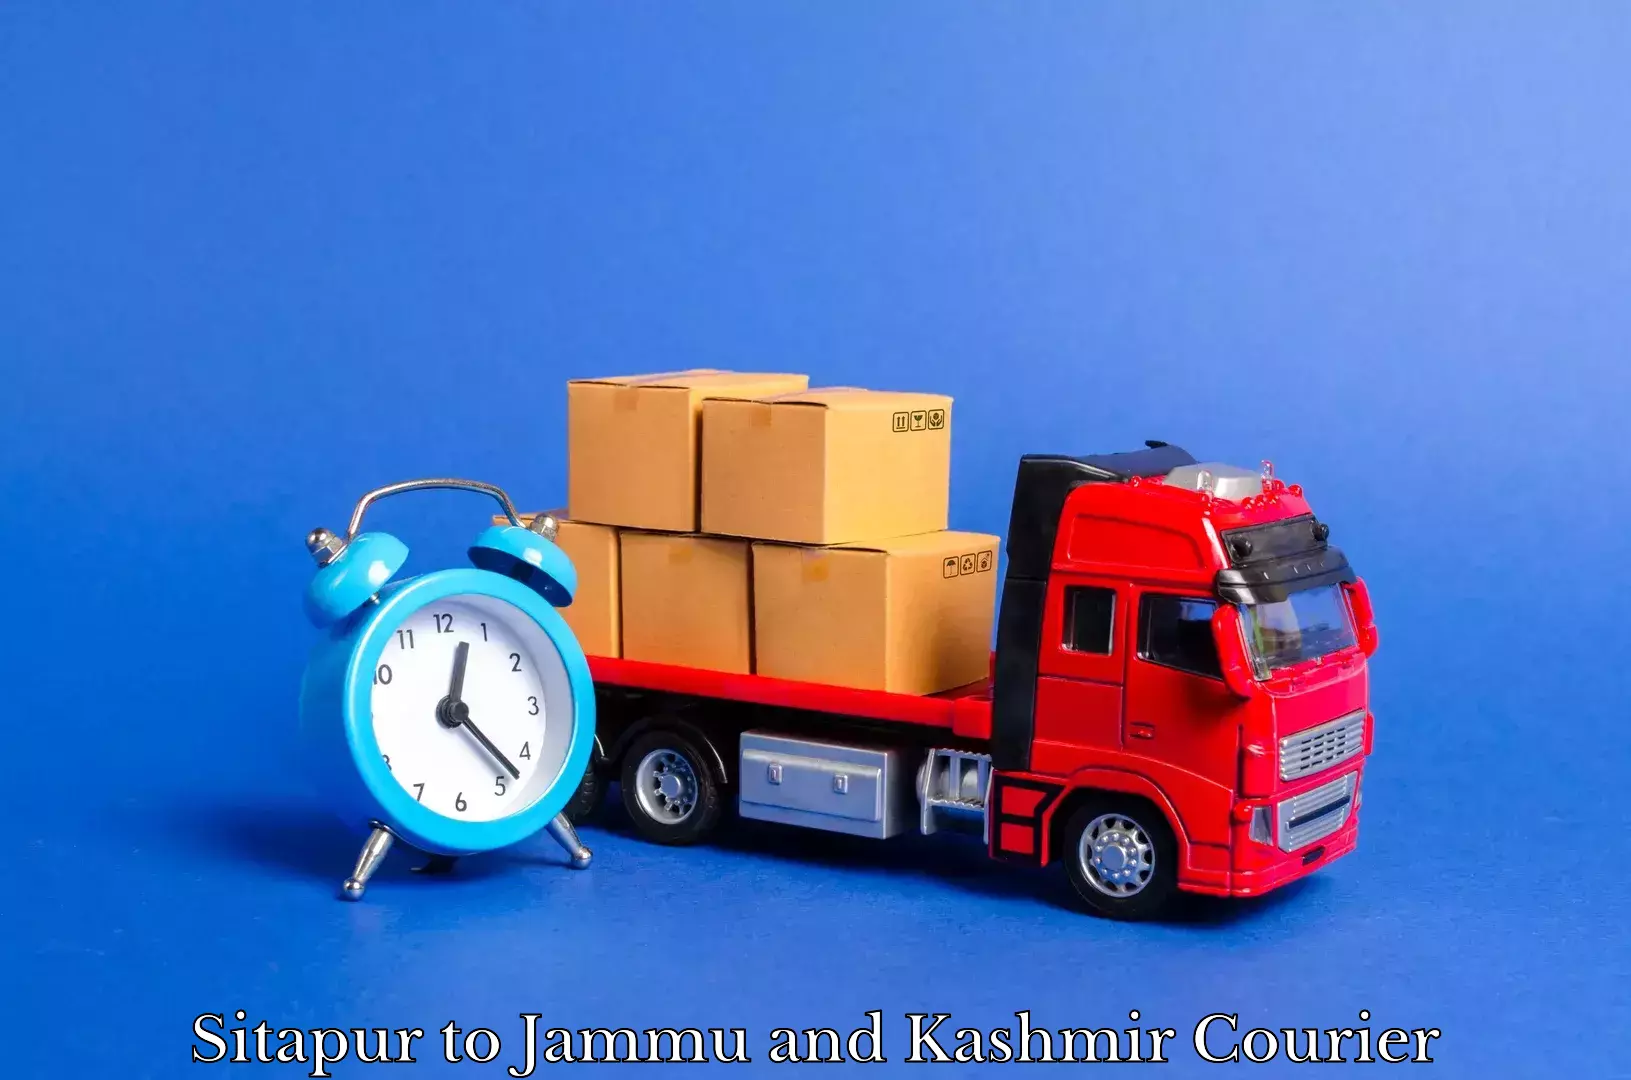 Trusted relocation experts Sitapur to Jammu and Kashmir